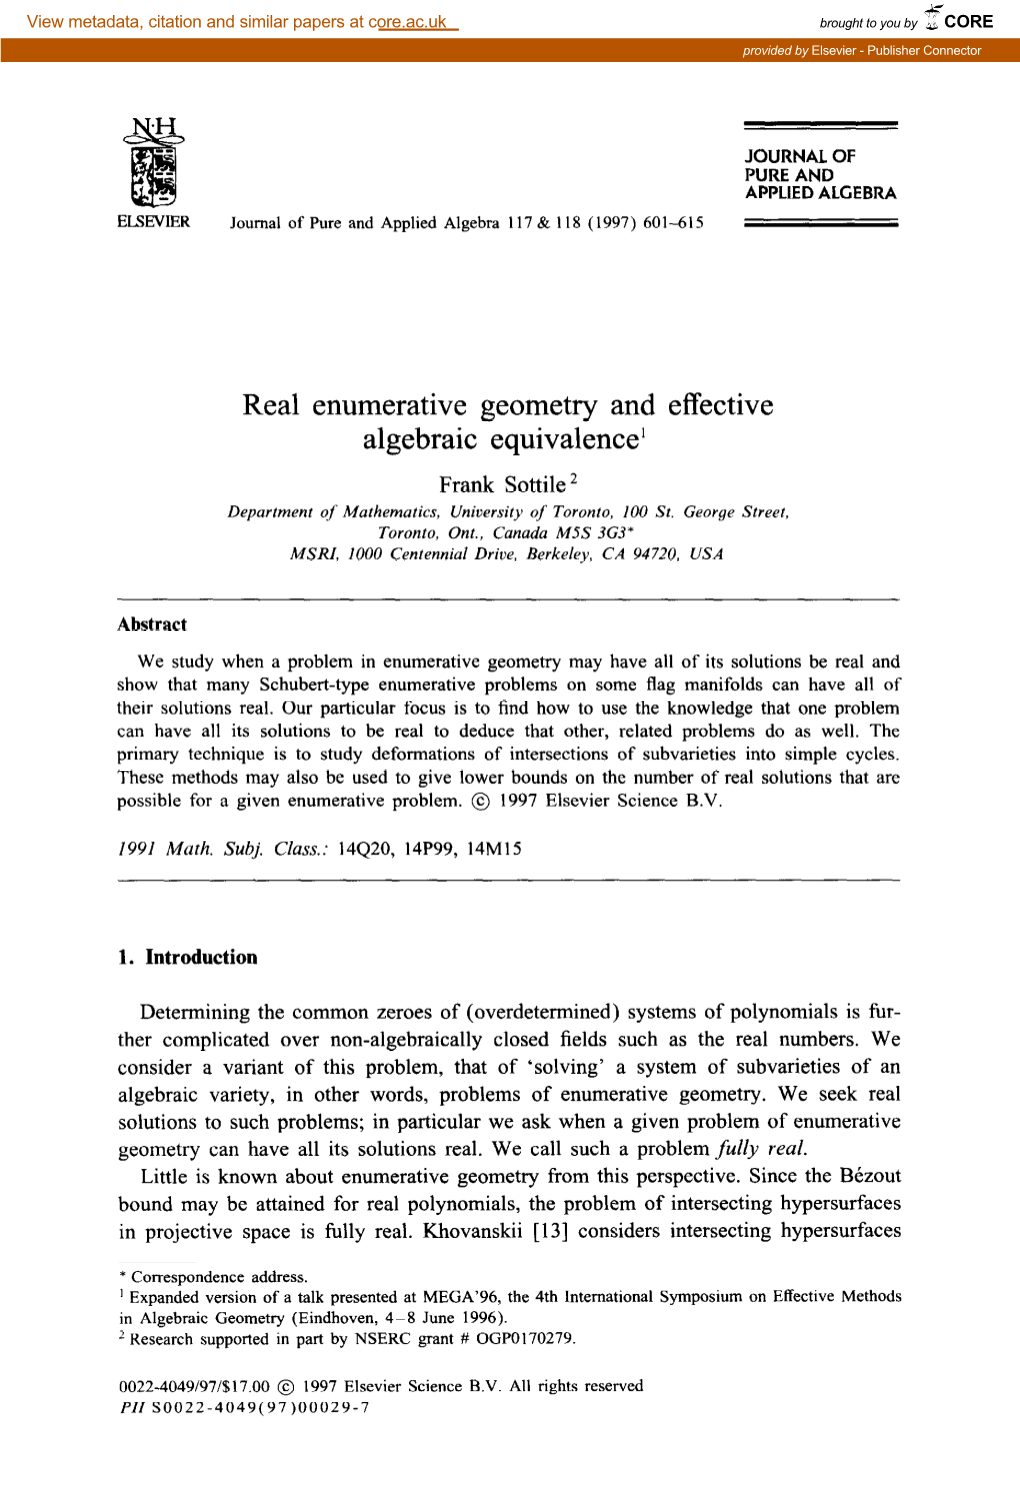 Real Enumerative Geometry and Effective Algebraic Equivalence'